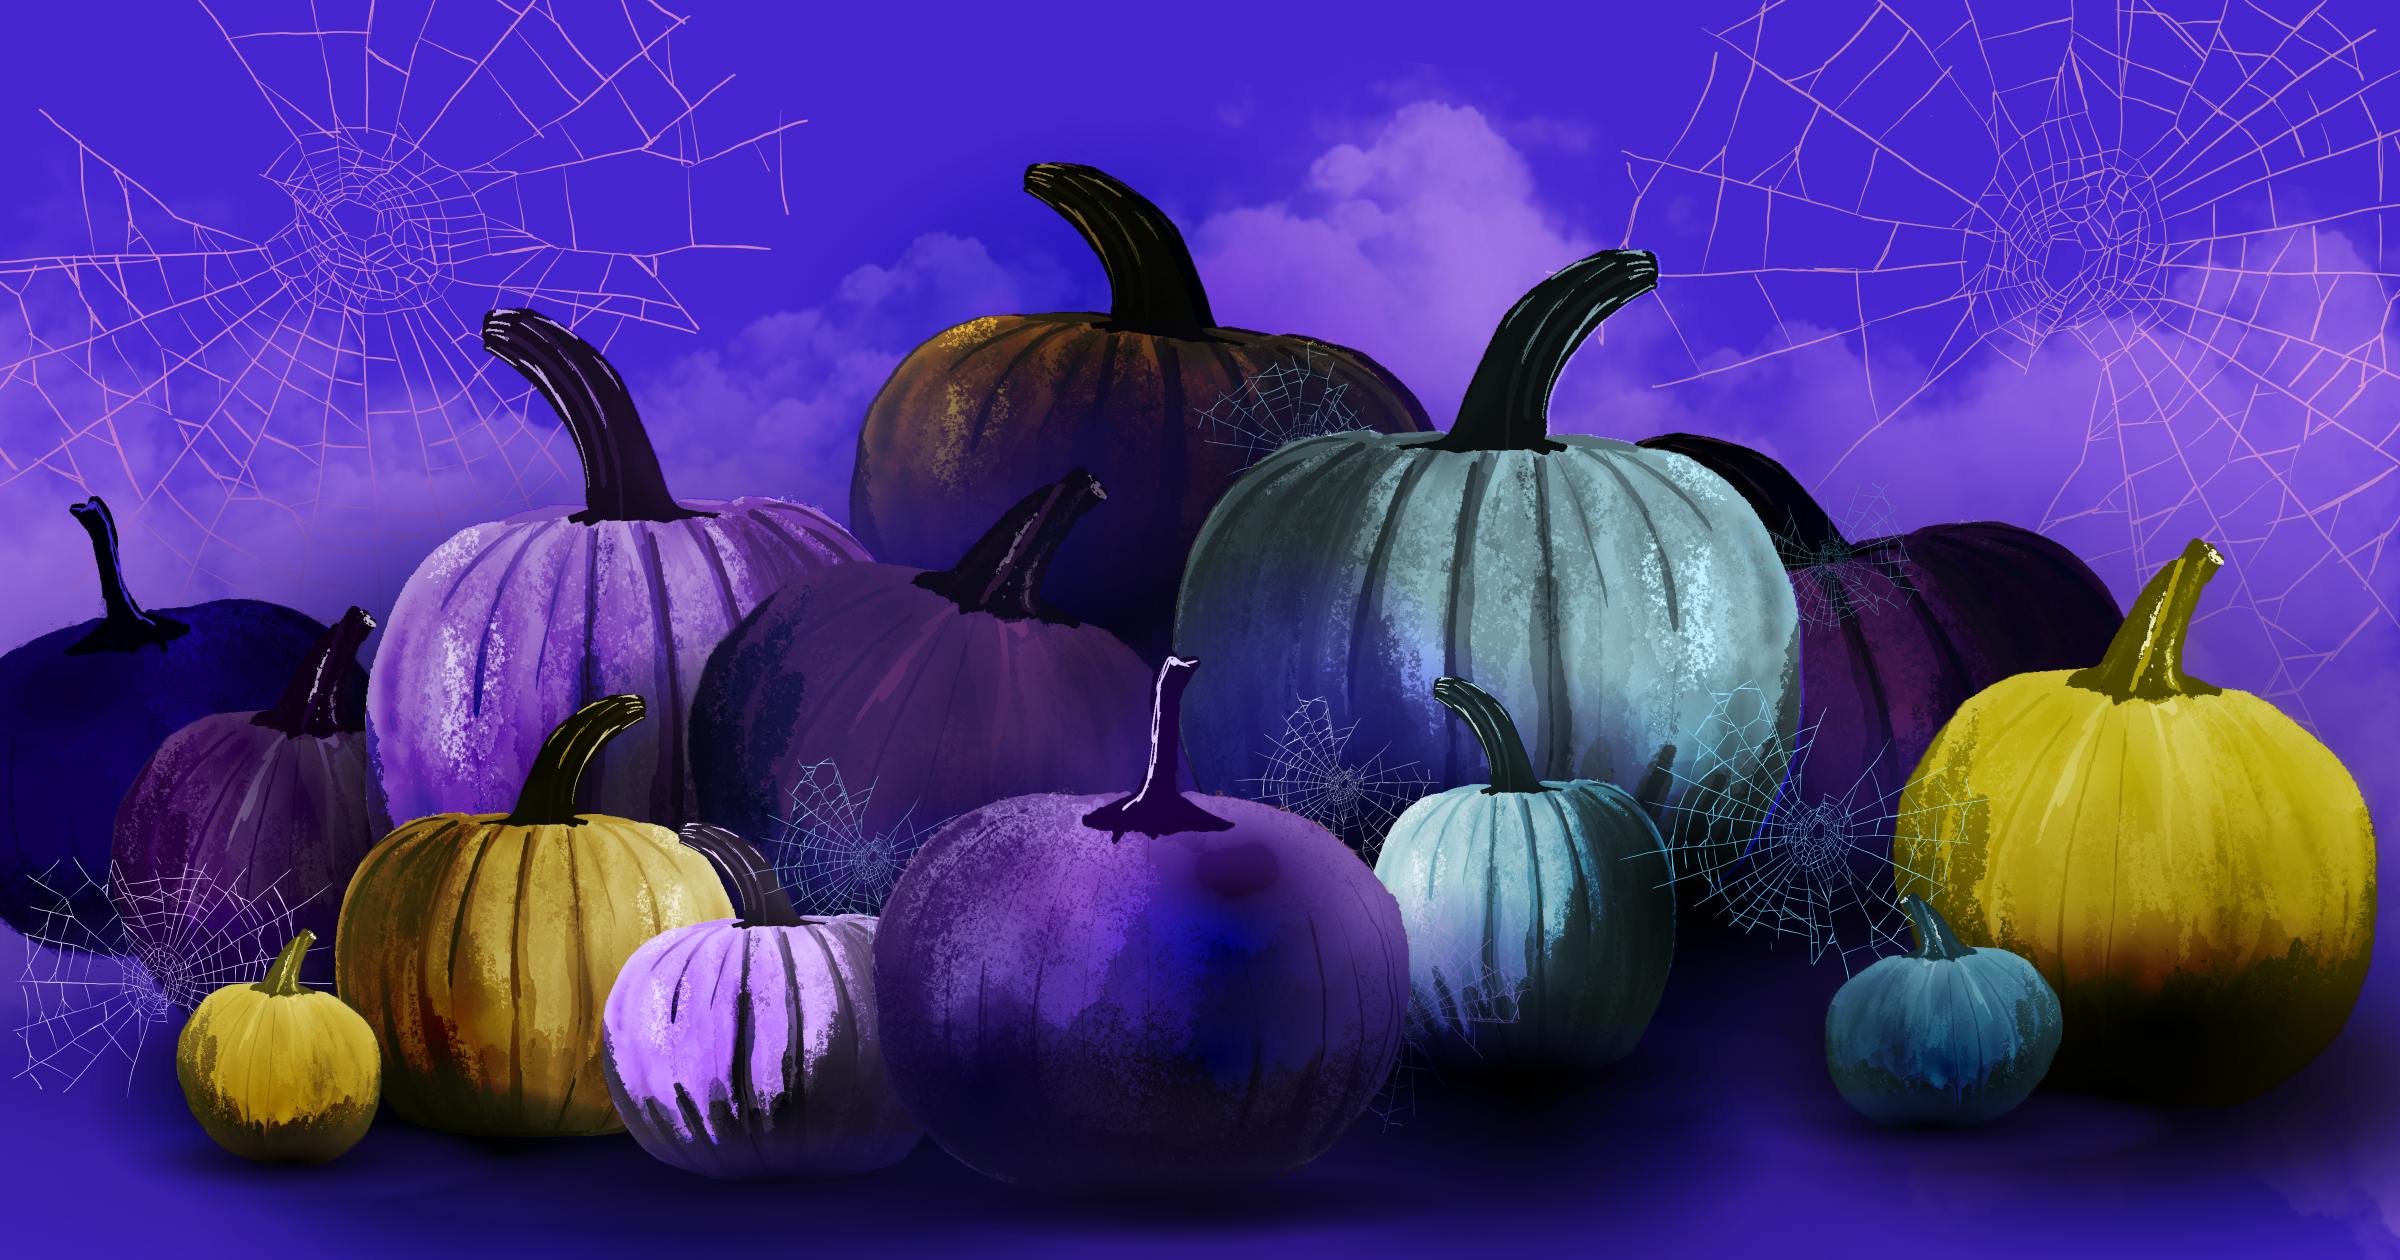 Different colored pumpkins and spiderwebs for Halloween